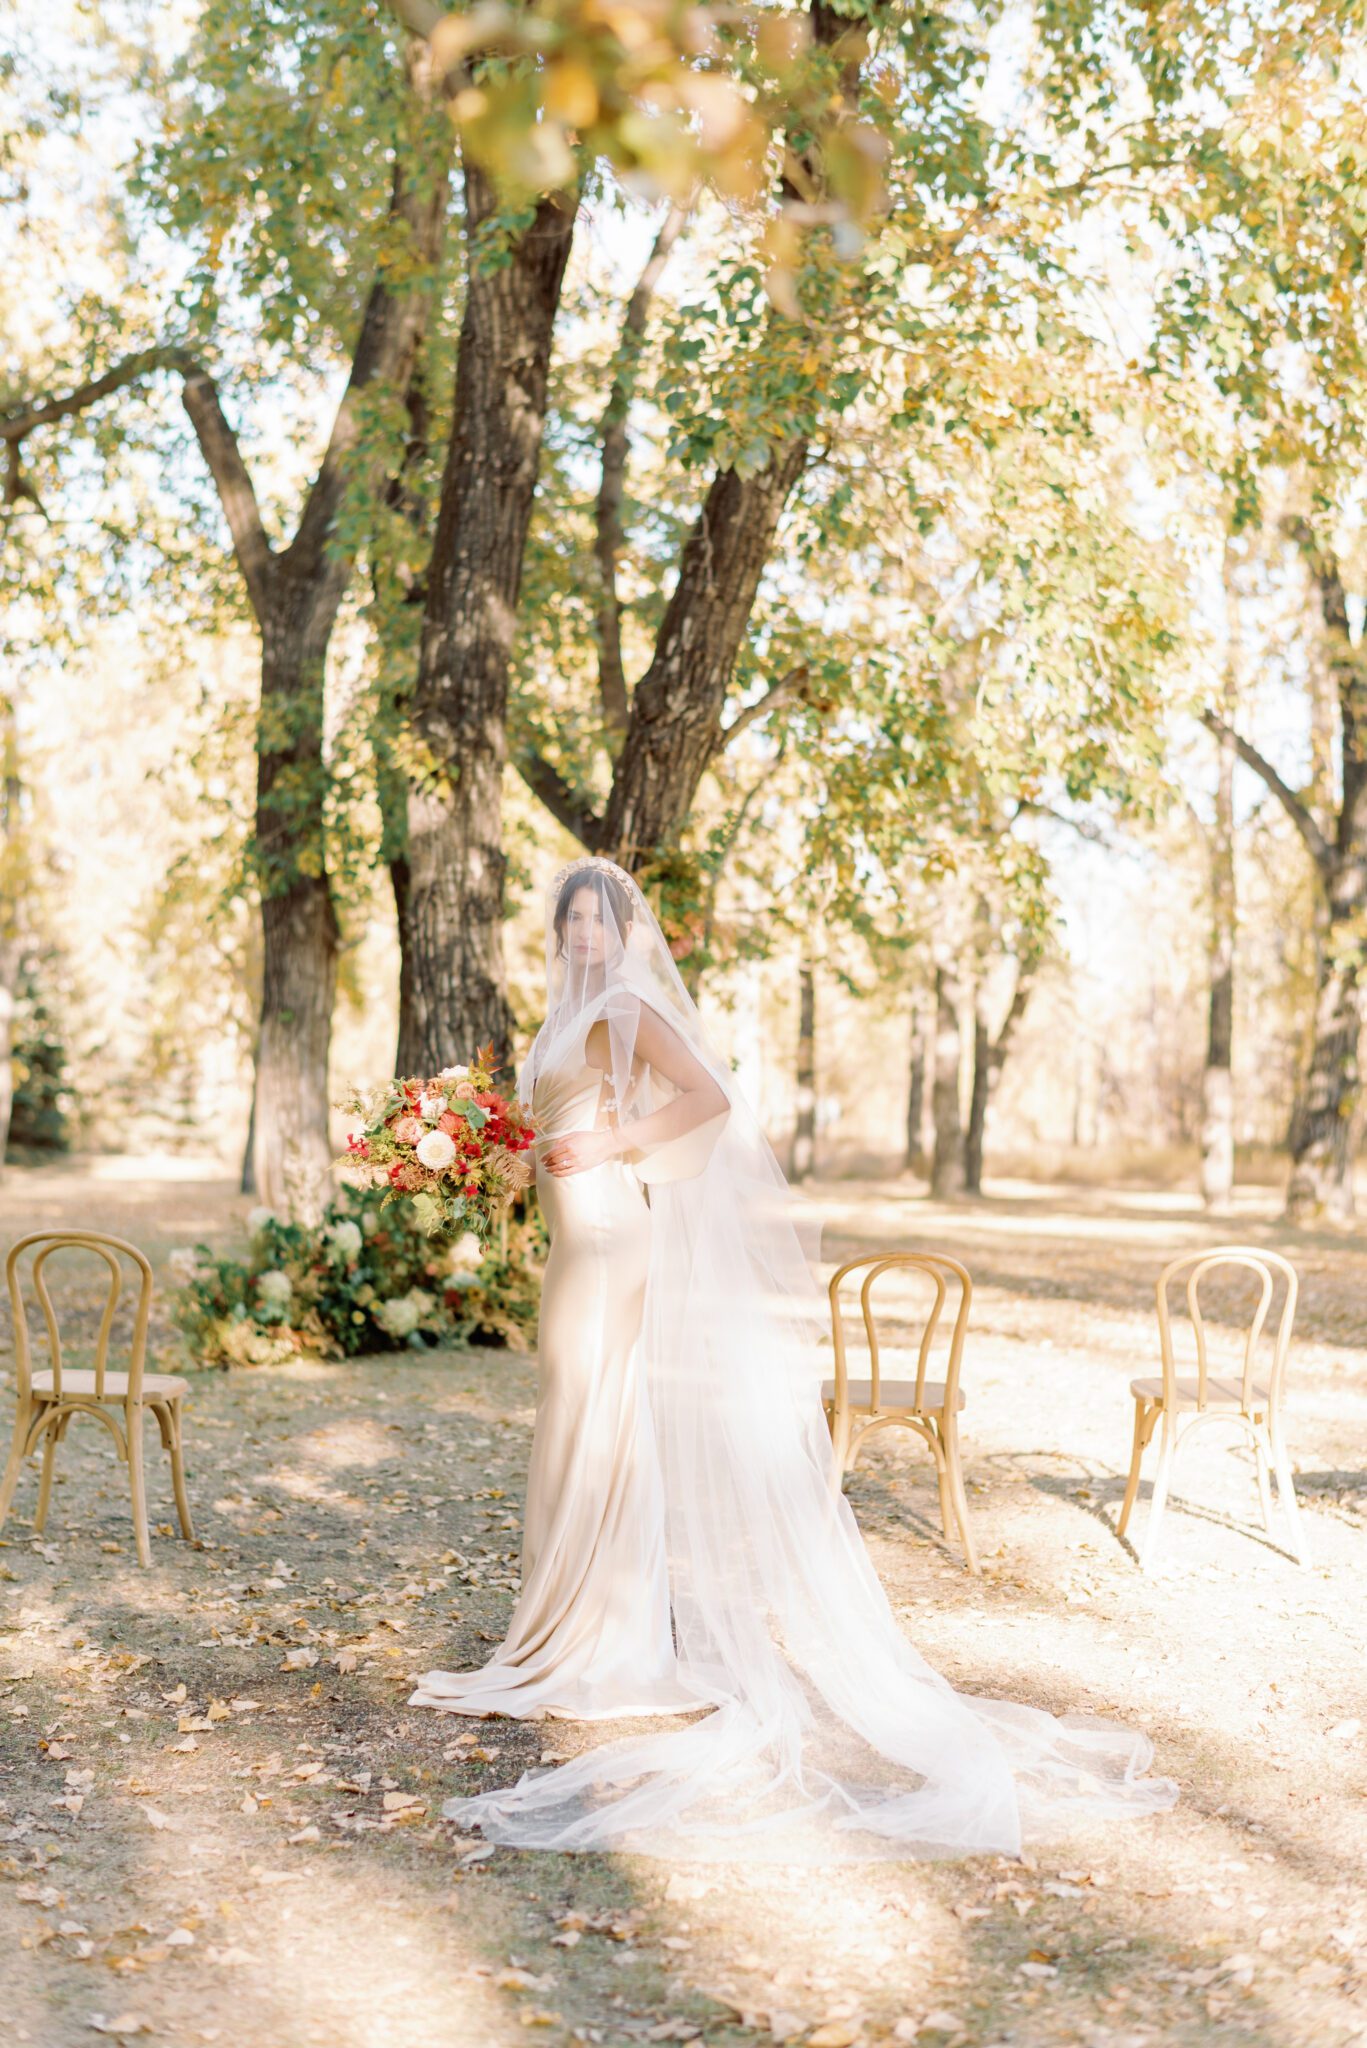 Bride wearing elegant champagne-toned satin wedding gown with cathedral length veil for this intimate autumn wedding inspiration.